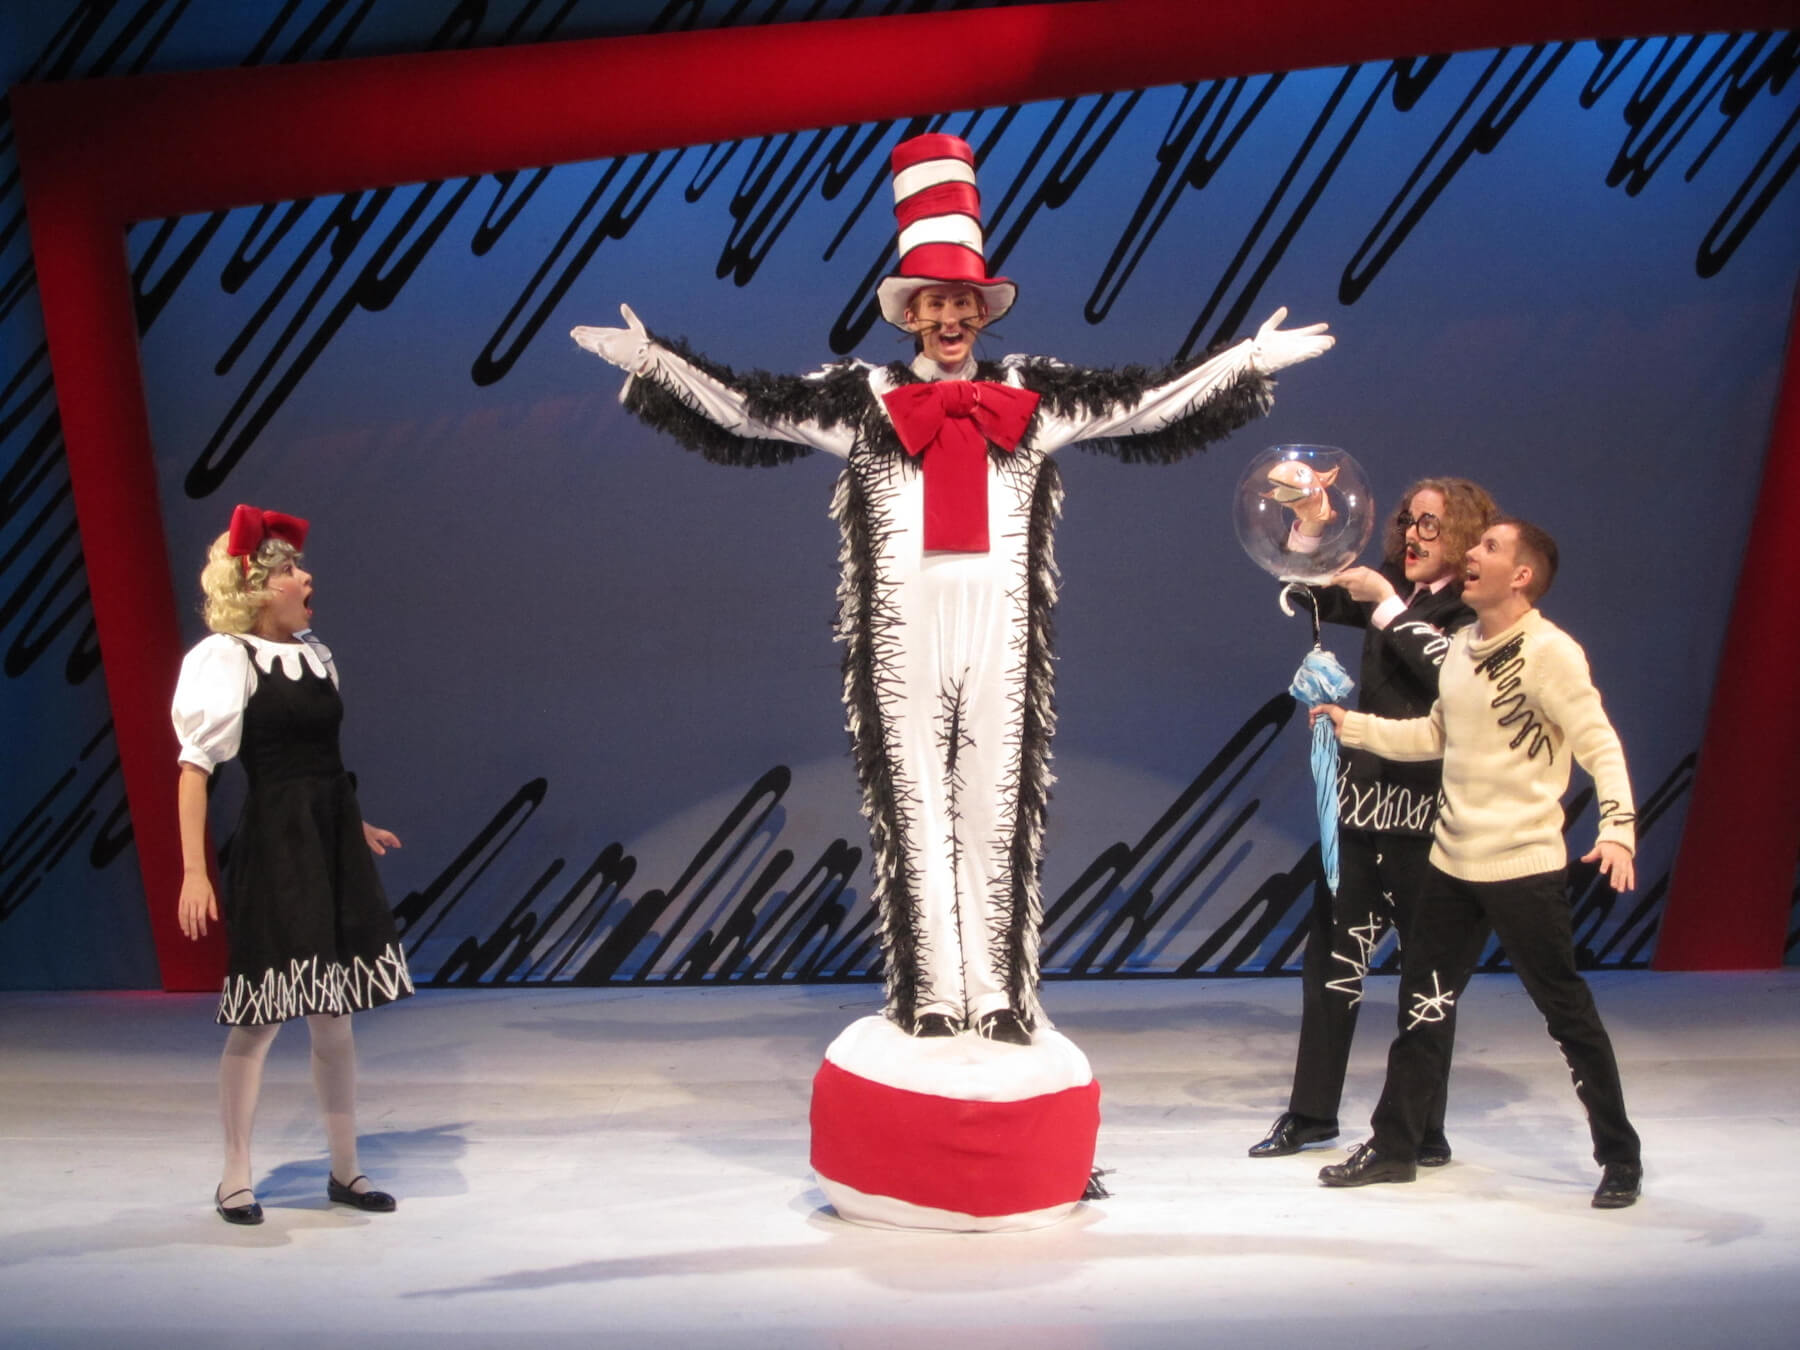 Sensory-Friendly Performance of “Dr. Seuss’s The Cat in the Hat”